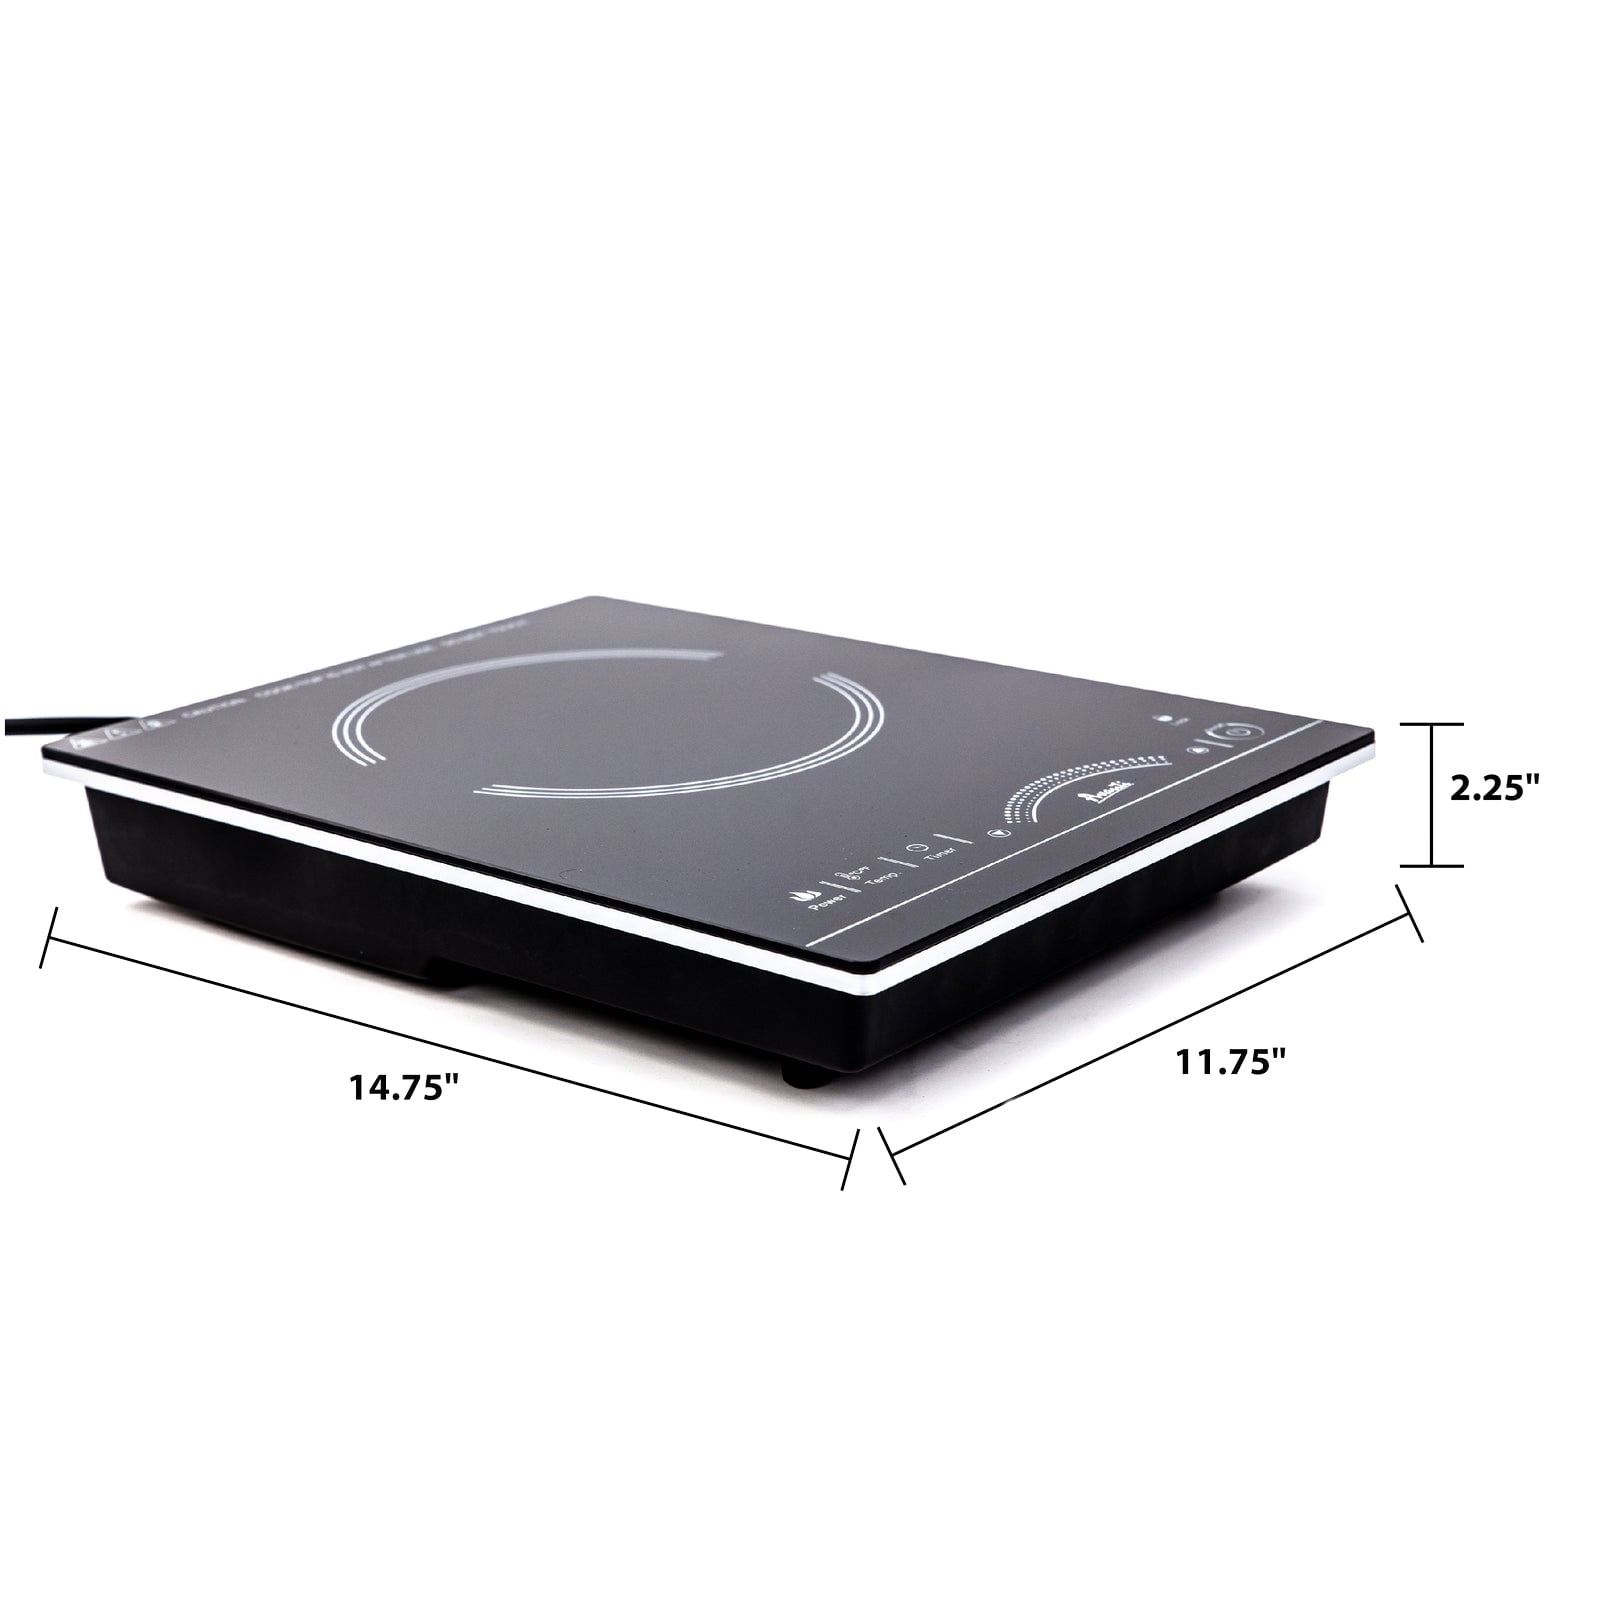 Multi-Function 1800W Portable Induction Cooker Cooktop Burner – Black by  Classic Cuisine - Ranges & Ovens - Dallas, Texas, Facebook Marketplace